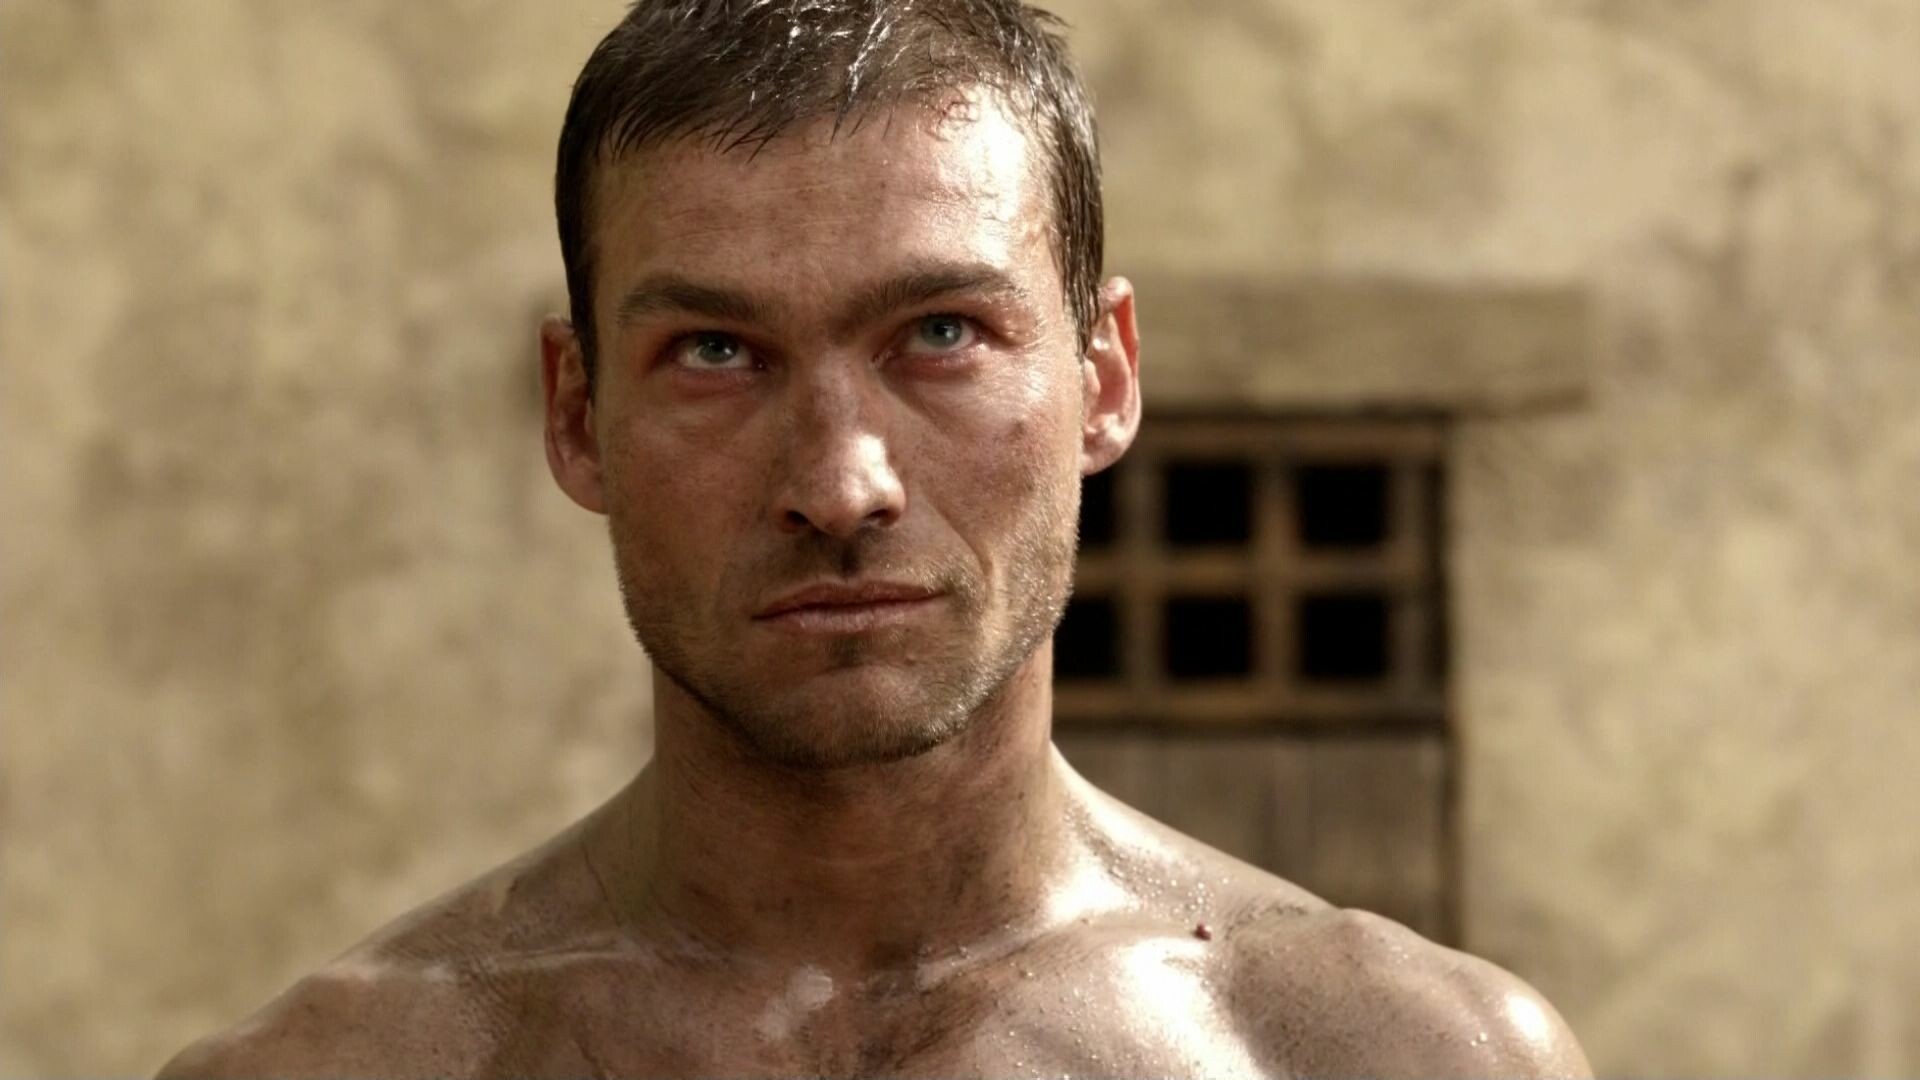 Spartacus: Blood and Sand: A Thracian slave who becomes a gladiator in the Ludus of Lentulus Batiatus before leading a slave uprising. 1920x1080 Full HD Wallpaper.